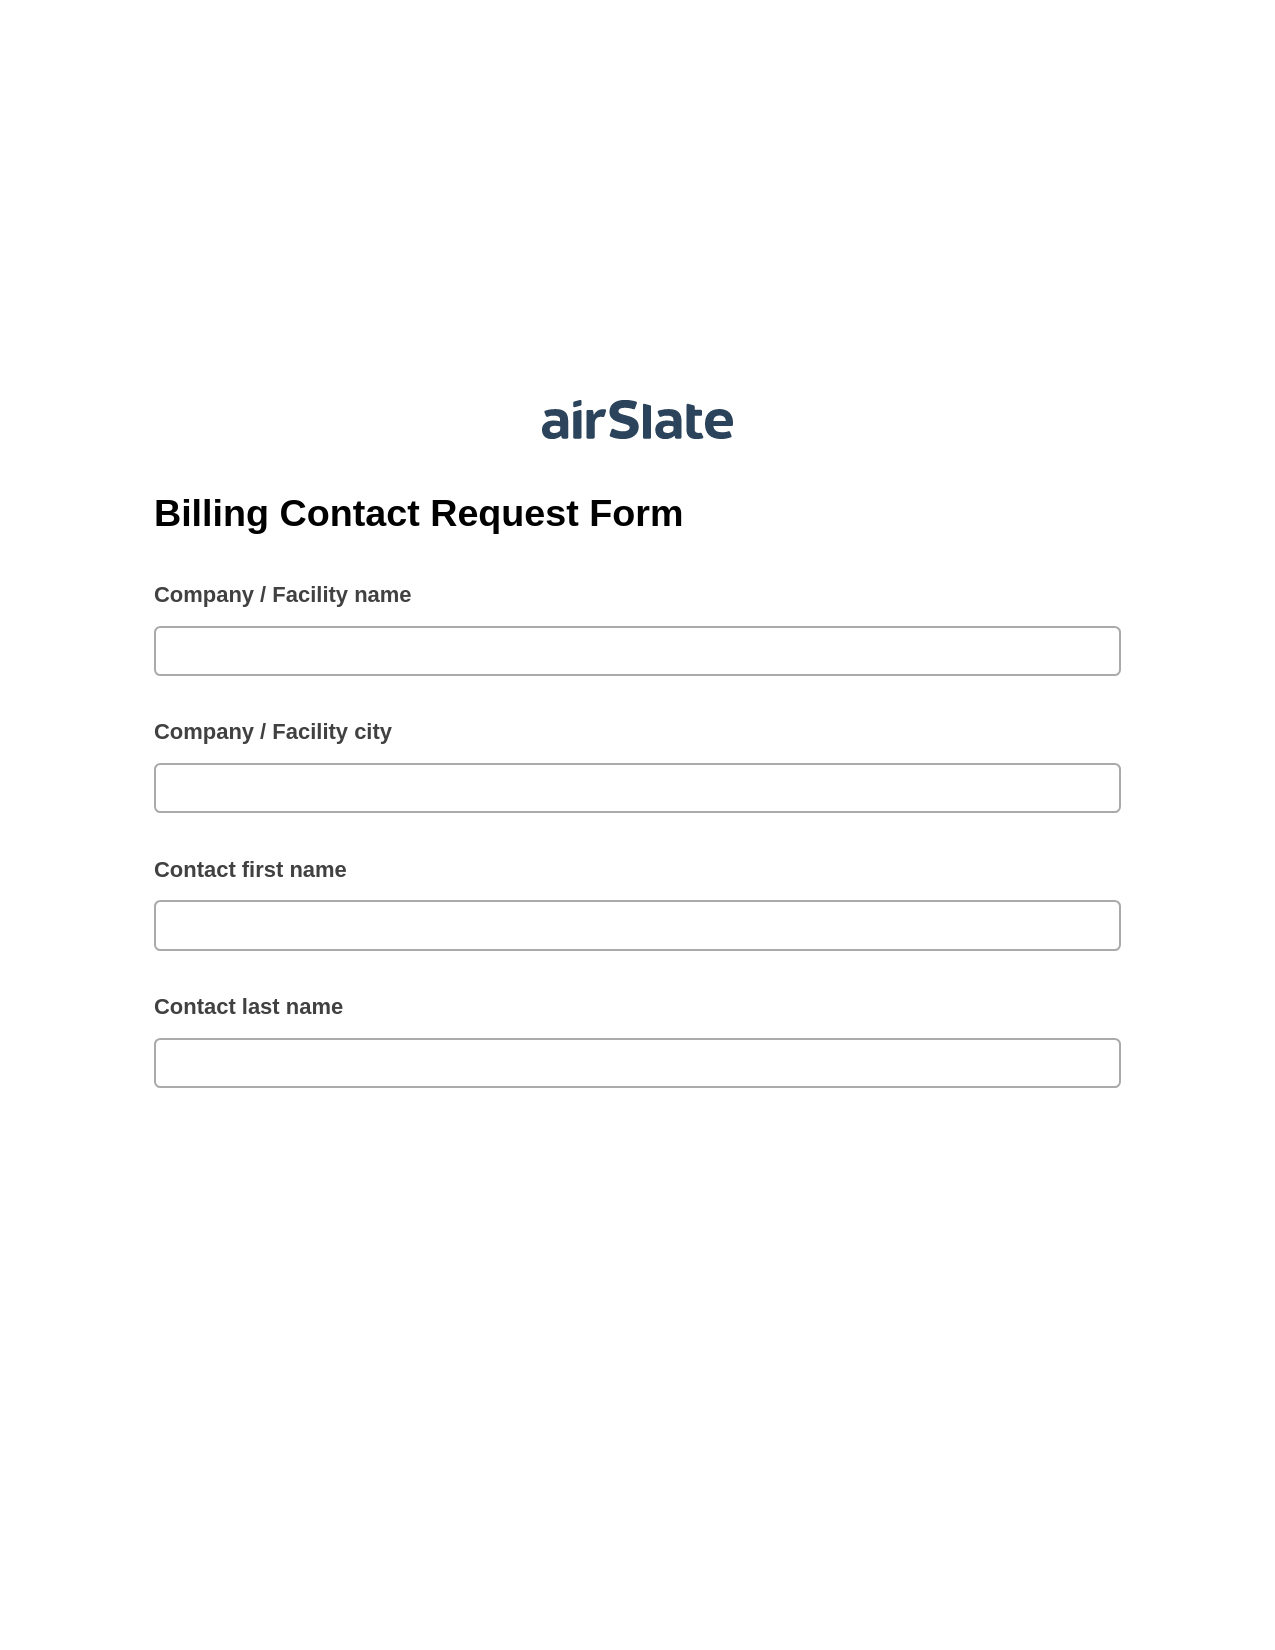 Multirole Billing Contact Request Form Pre-fill from NetSuite Records Bot, Assign Slate Name Bot, Archive to SharePoint Folder Bot